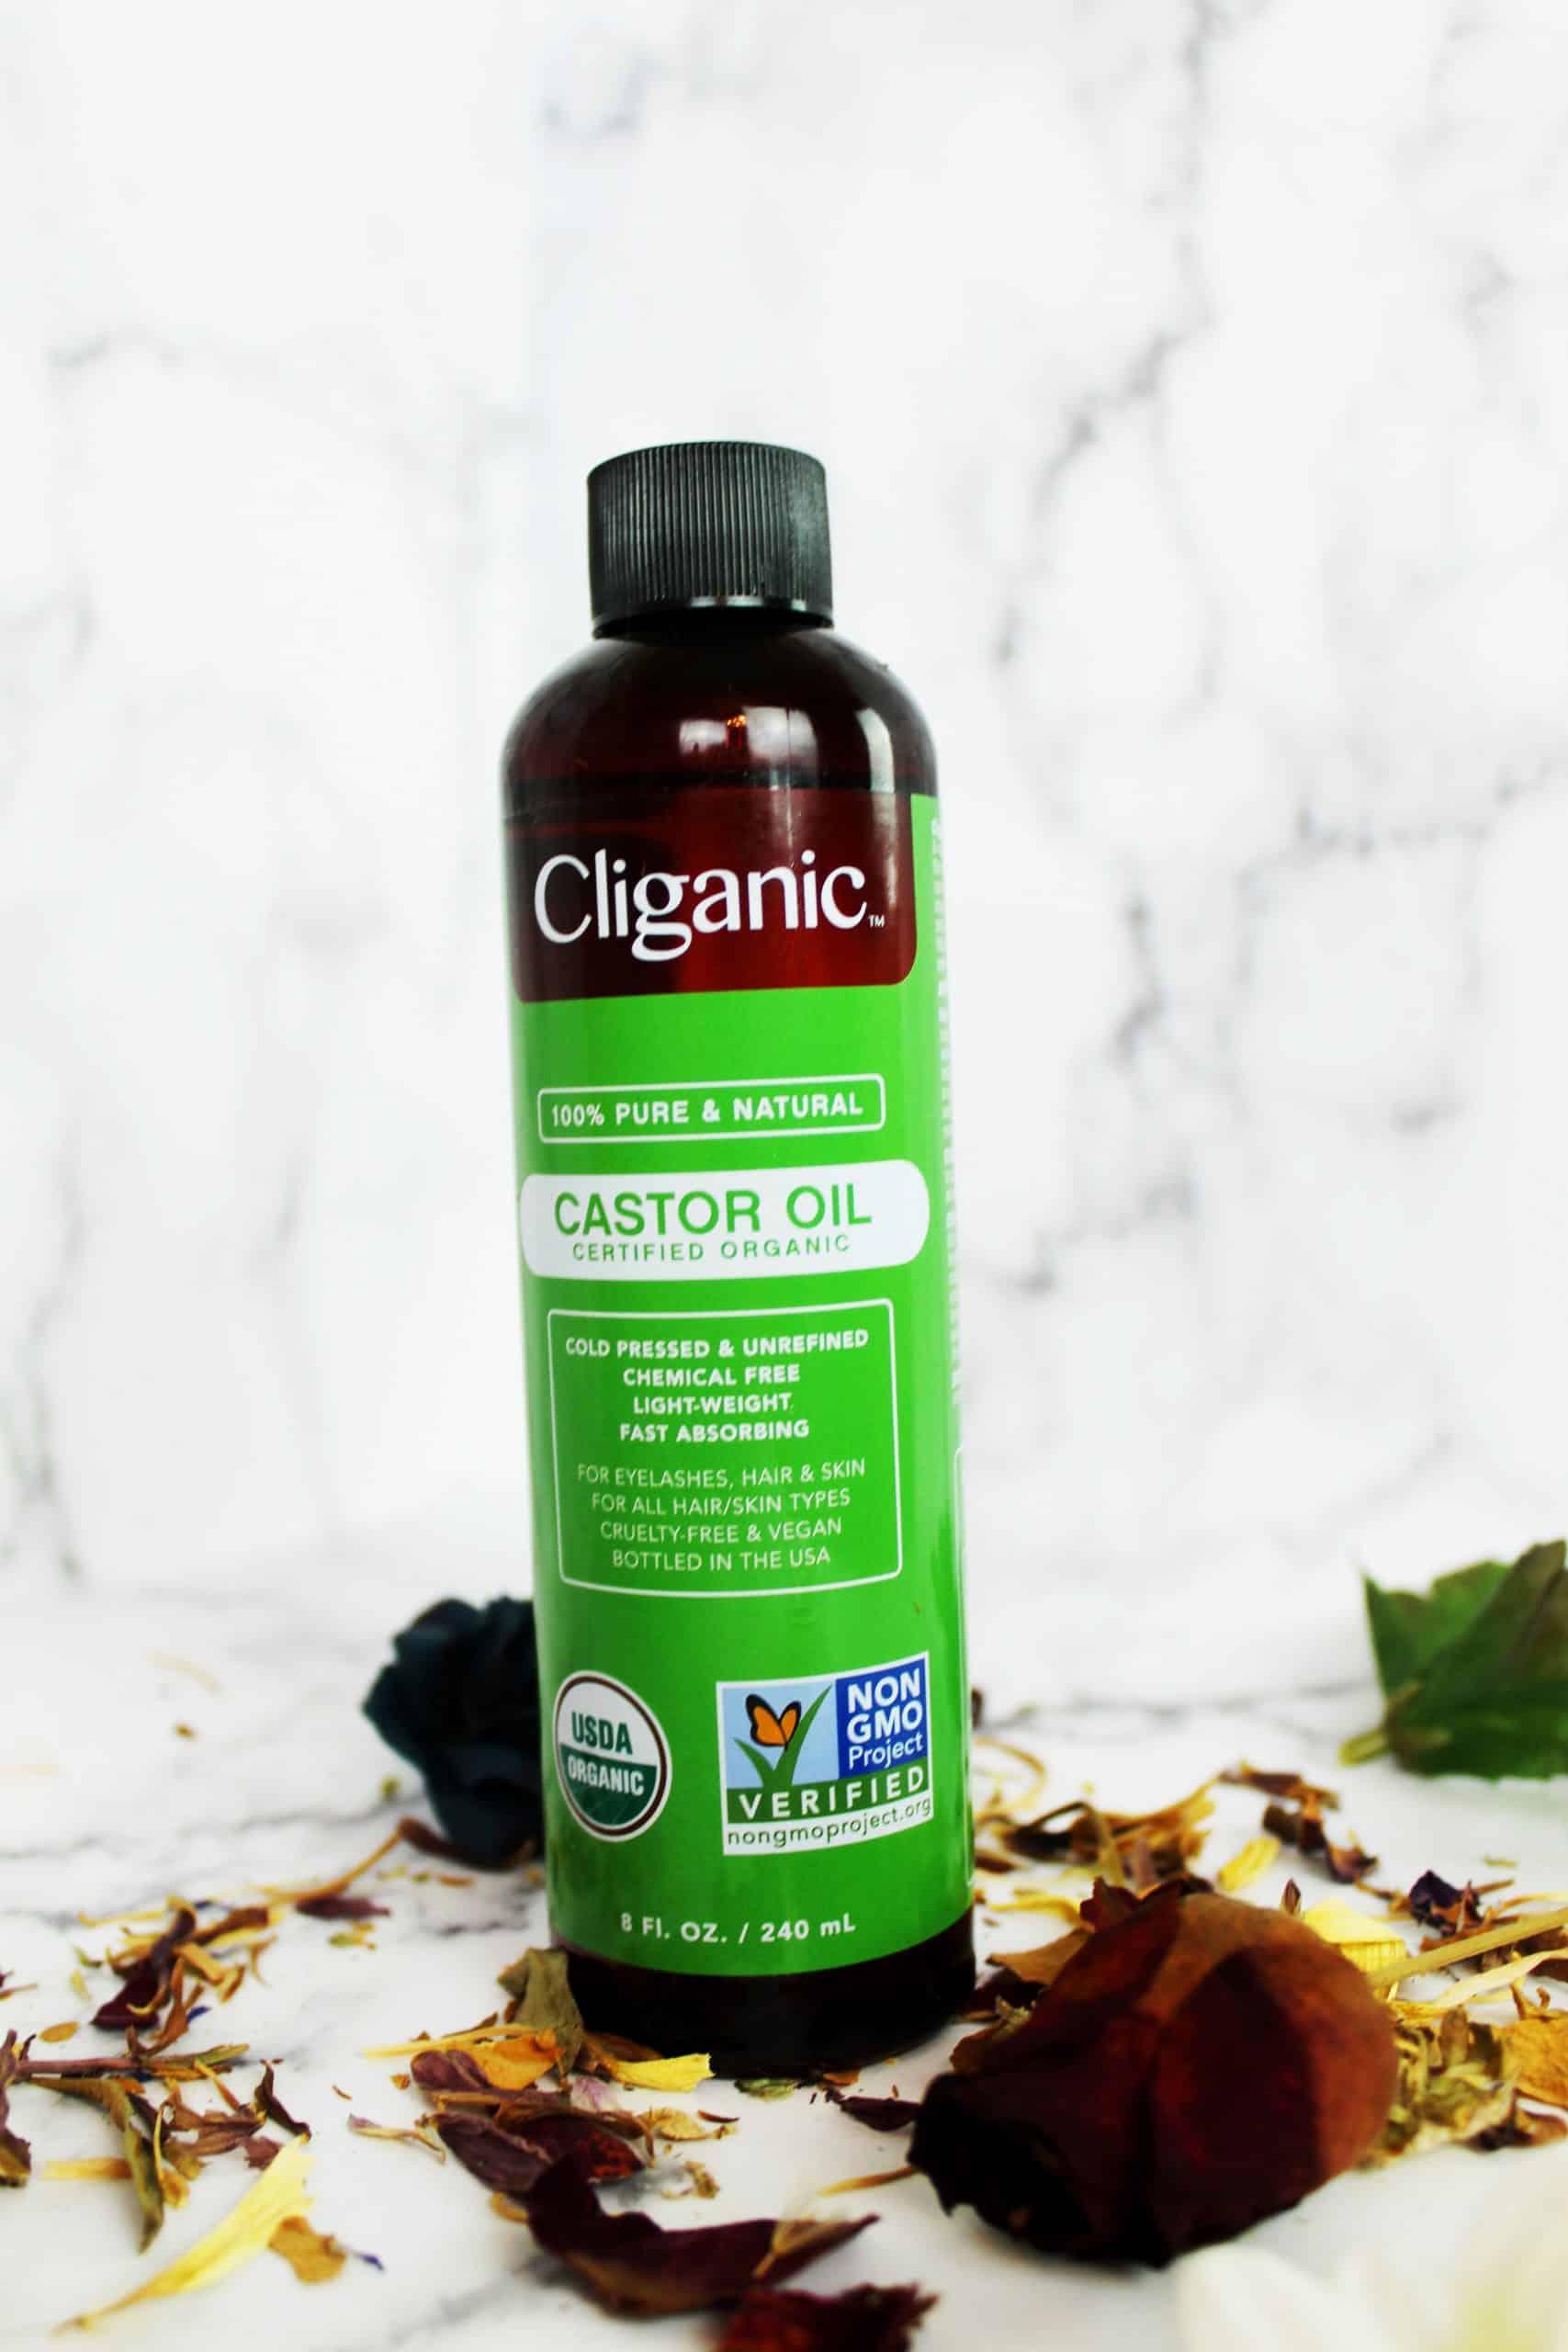 Why Castor Oil for the Carrier Oil scaled